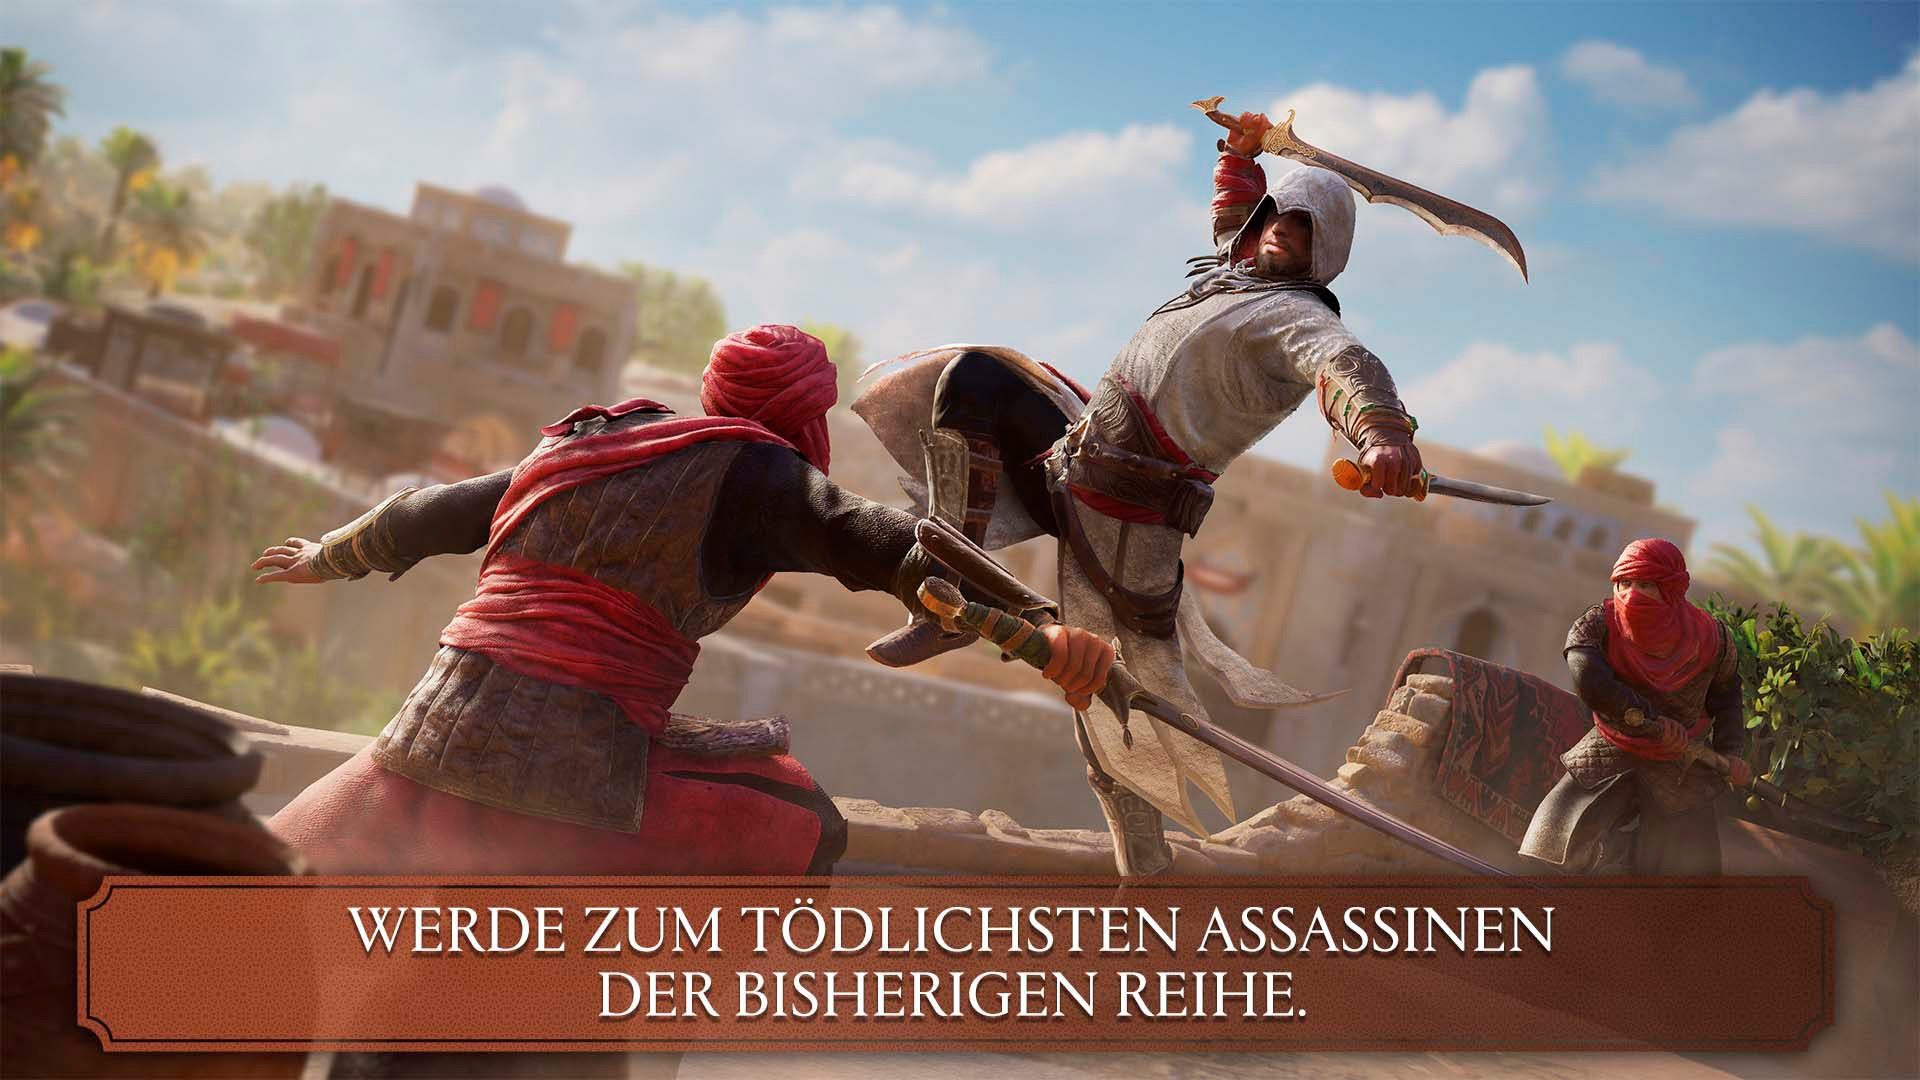 4 Upgrade Assassin's UBISOFT (kostenloses - PS5) Mirage Edition Creed Deluxe auf PlayStation